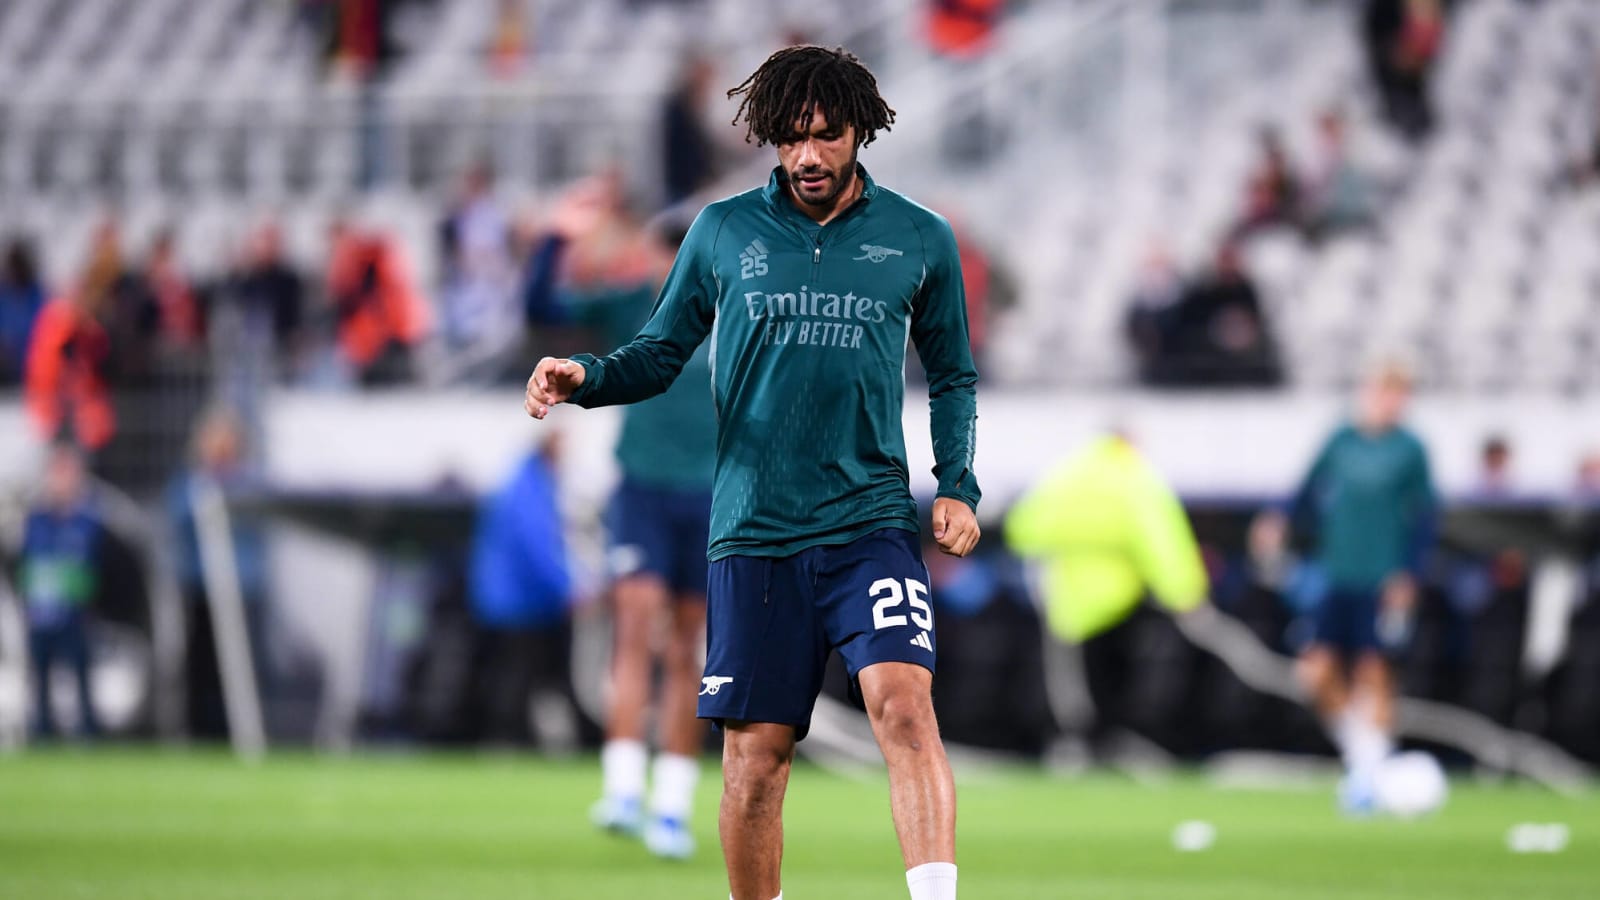 Mo Elneny cruelly knocked out of AFCON after Egypt lose on penalties